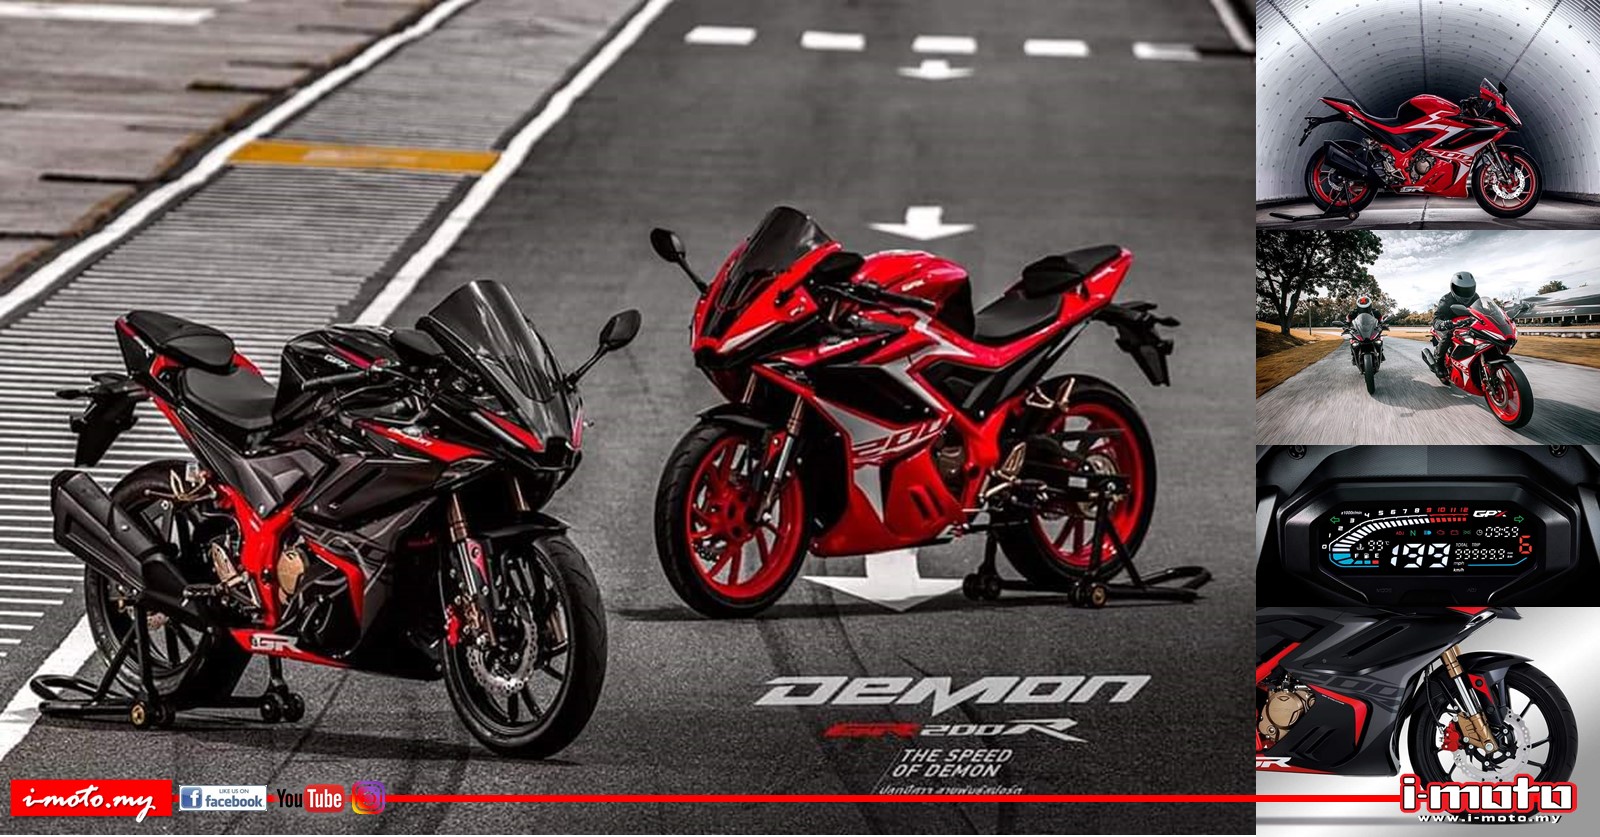 FIRST LOOK: GPX RACING DEMON 200GR LAUNCH IN THAILAND AND COMING SOON ...